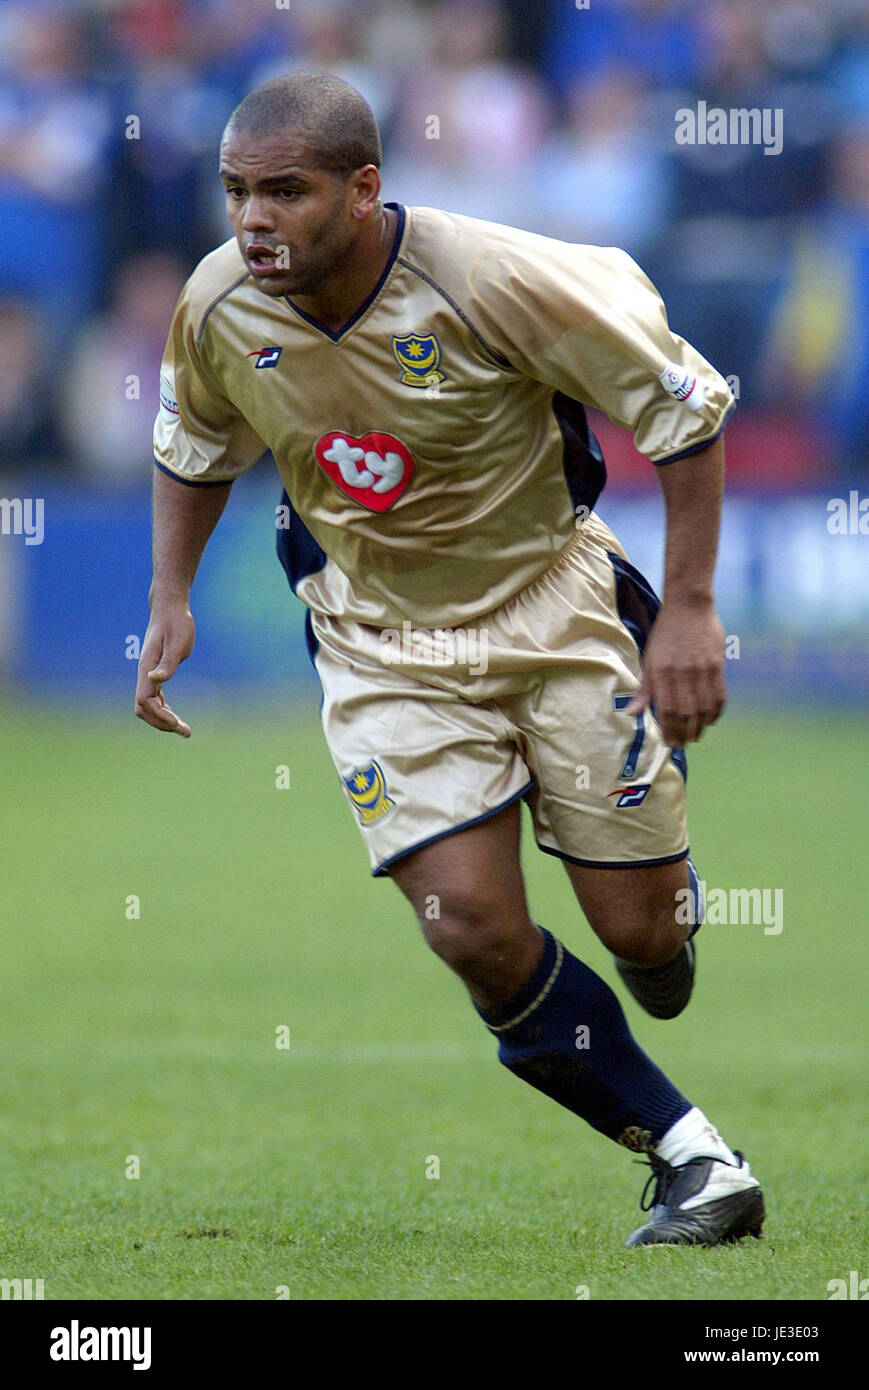 KEVIN HARPER PORTSMOUTH FC BESCOT STADIUM WALSALL ENGLAND 05 April 2003 Stock Photo